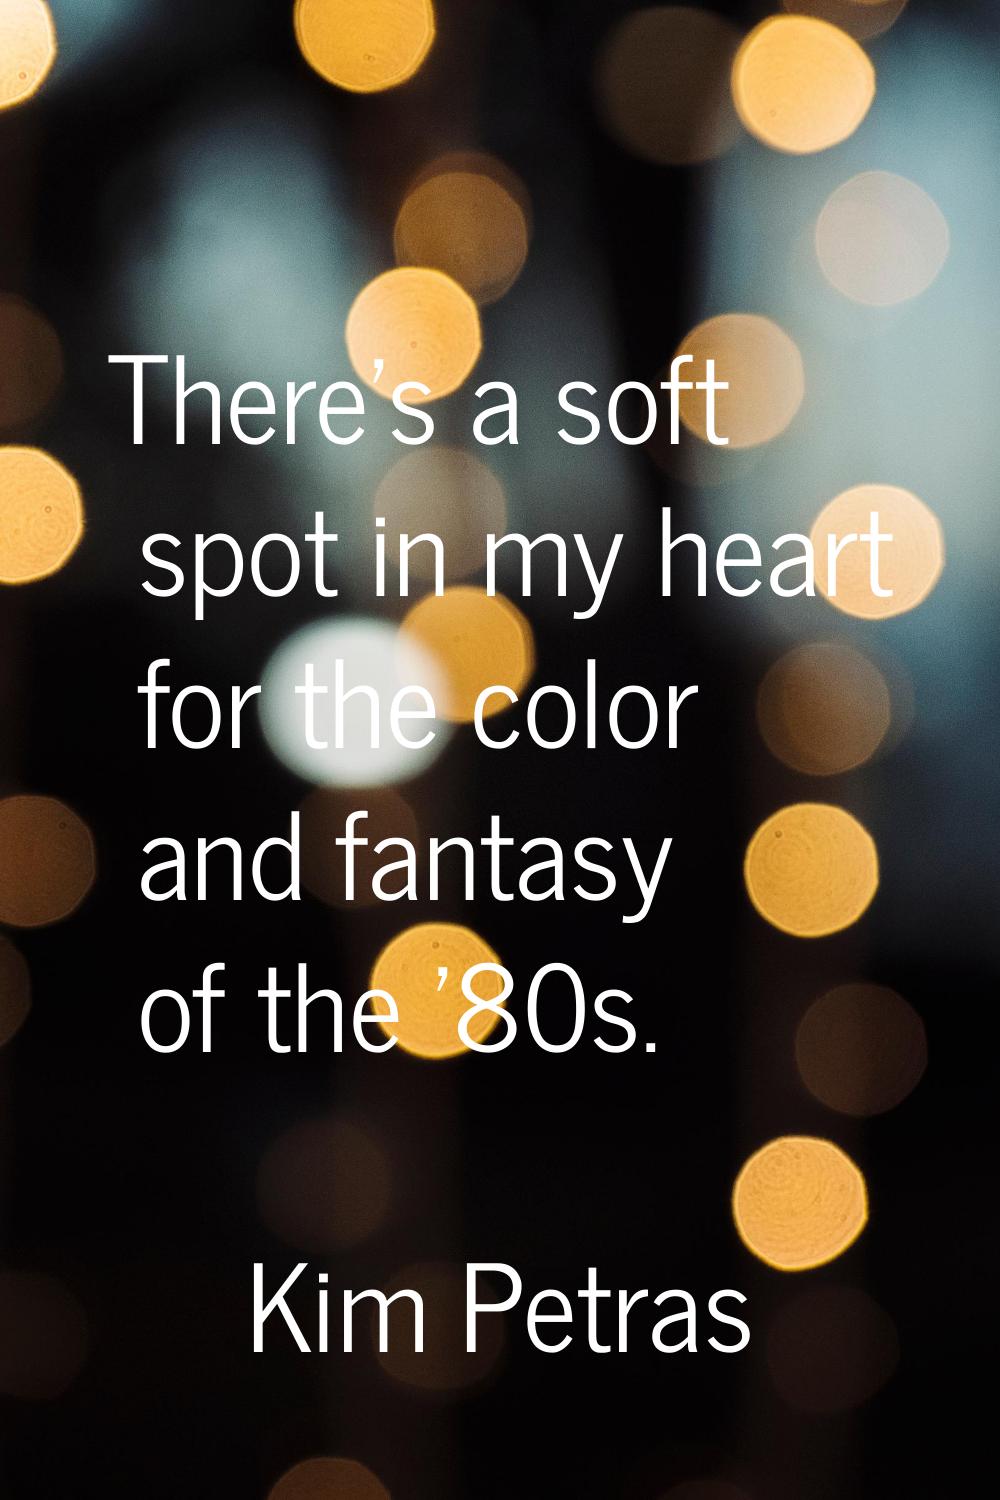 There's a soft spot in my heart for the color and fantasy of the '80s.